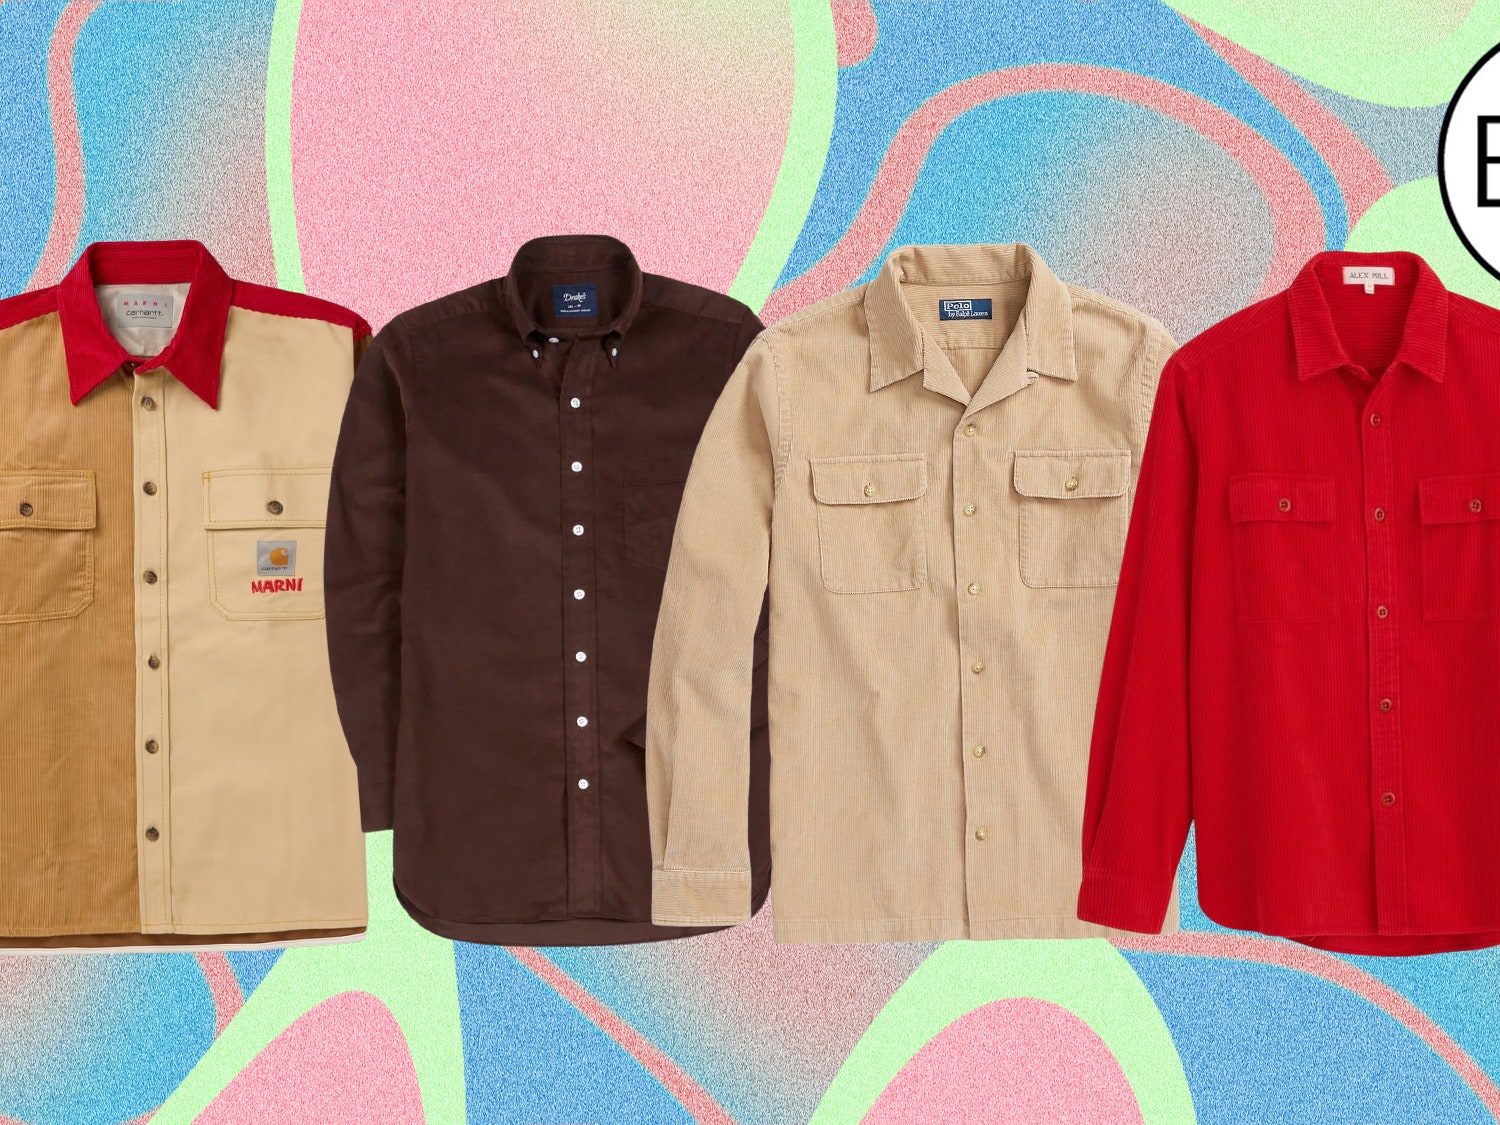 The Best Corduroy Shirts Will Enrich Your Entire Wardrobe